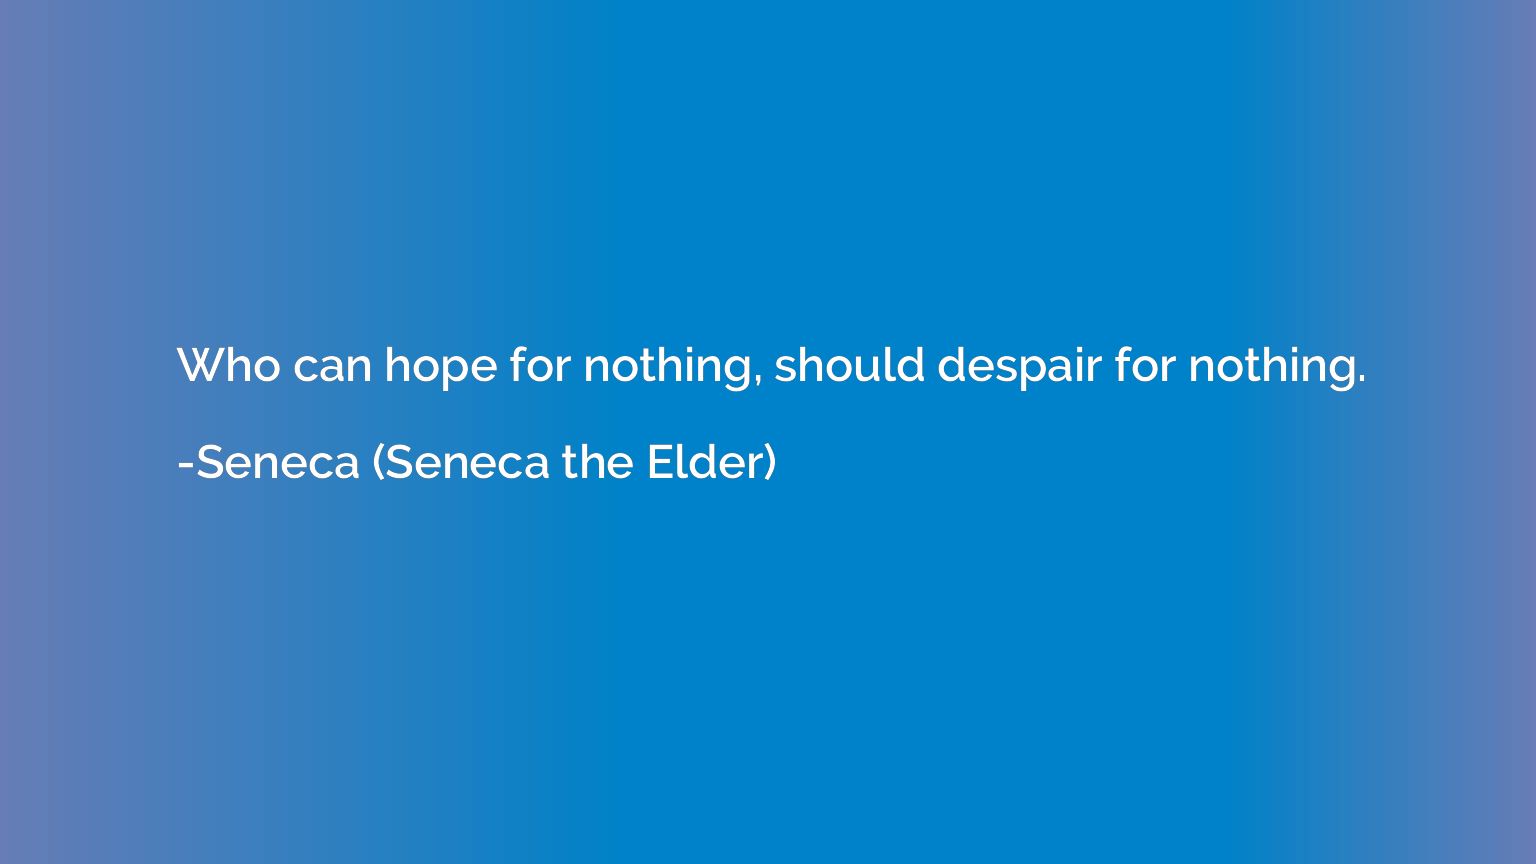 Who can hope for nothing, should despair for nothing.